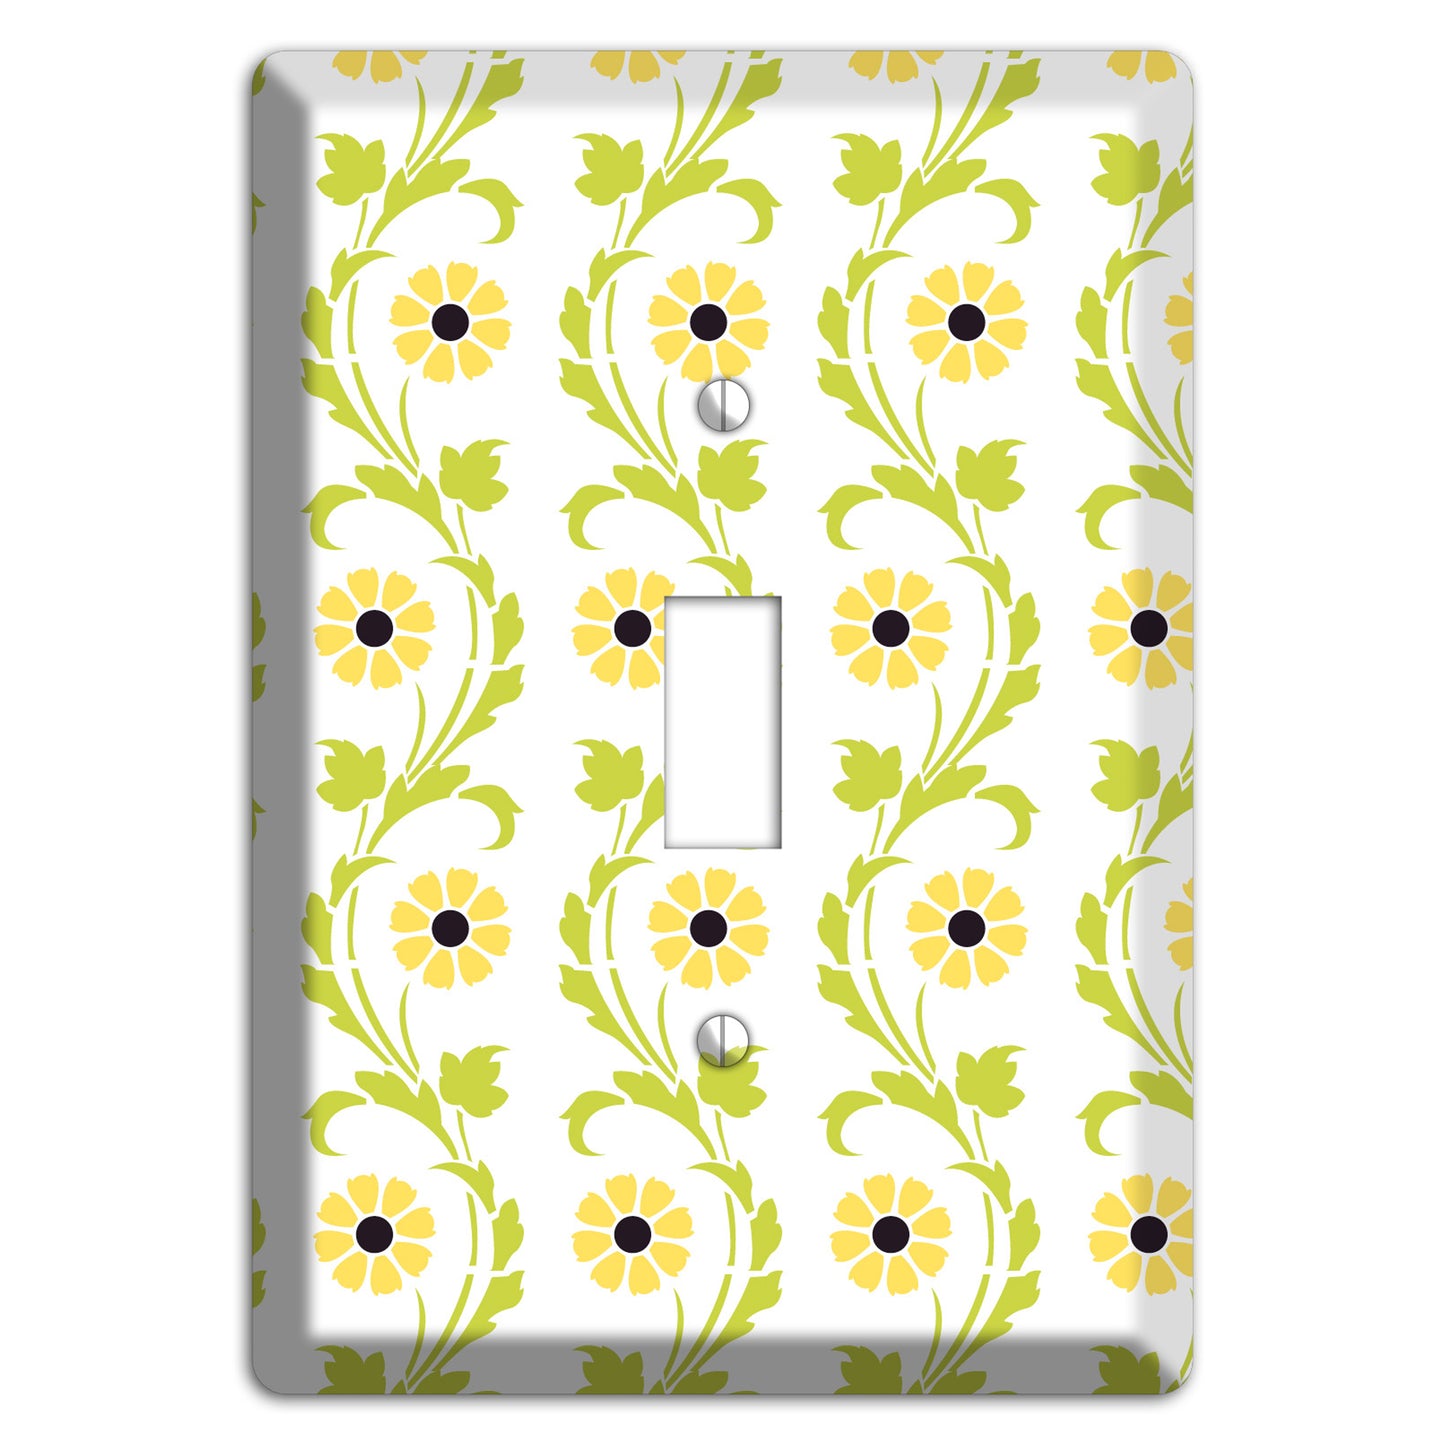 Green Vine Floral Cover Plates